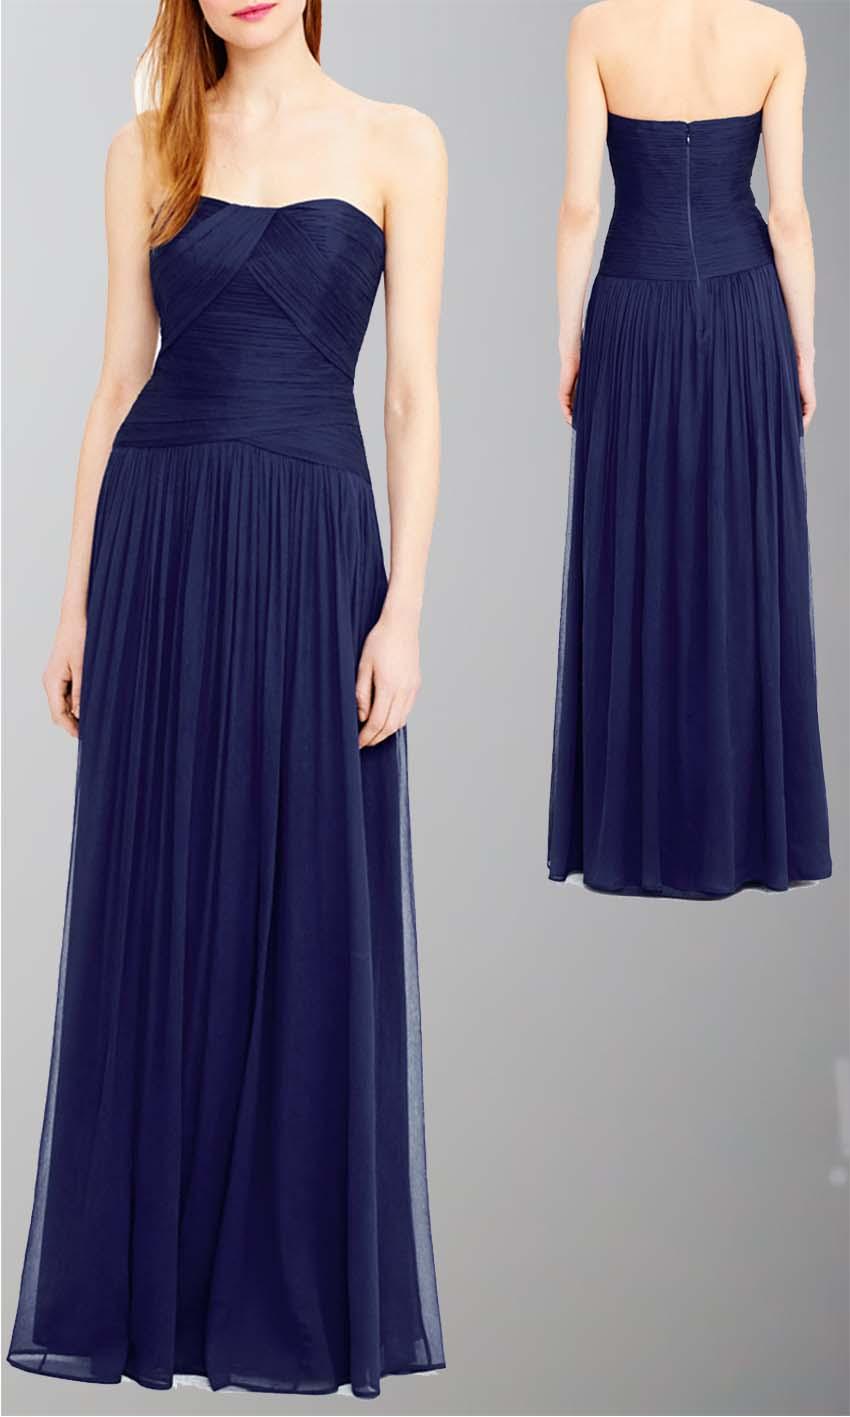 Wedding - Navy Draped Flattering Long Bridesmaid Dress UK KSP337 [KSP337] - £92.00 : Cheap Prom Dresses Uk, Bridesmaid Dresses, 2014 Prom & Evening Dresses, Look for cheap elegant prom dresses 2014, cocktail gowns, or dresses for special occasions? kissprom.co.uk o